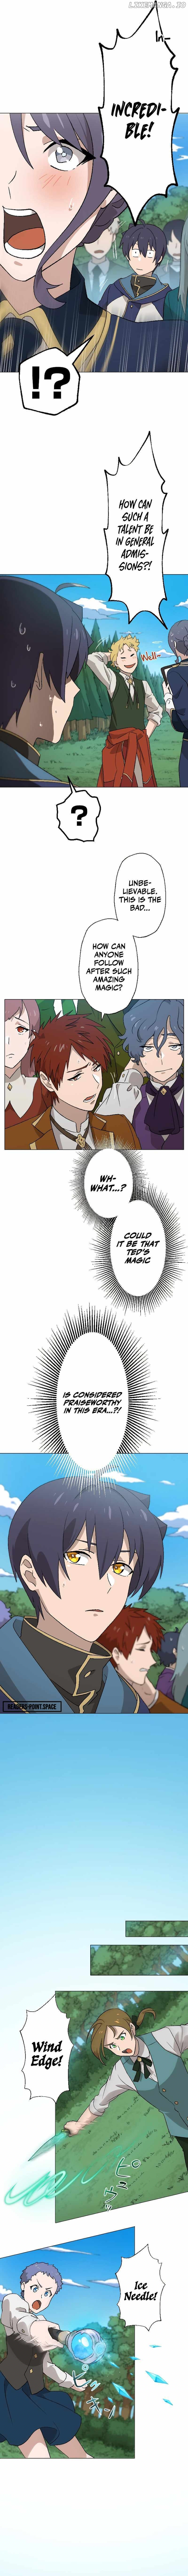 The Reincarnated Magician with Inferior Eyes ~The Oppressed Ex-Hero Survives the Future World with Ease~ Chapter 10 - page 6